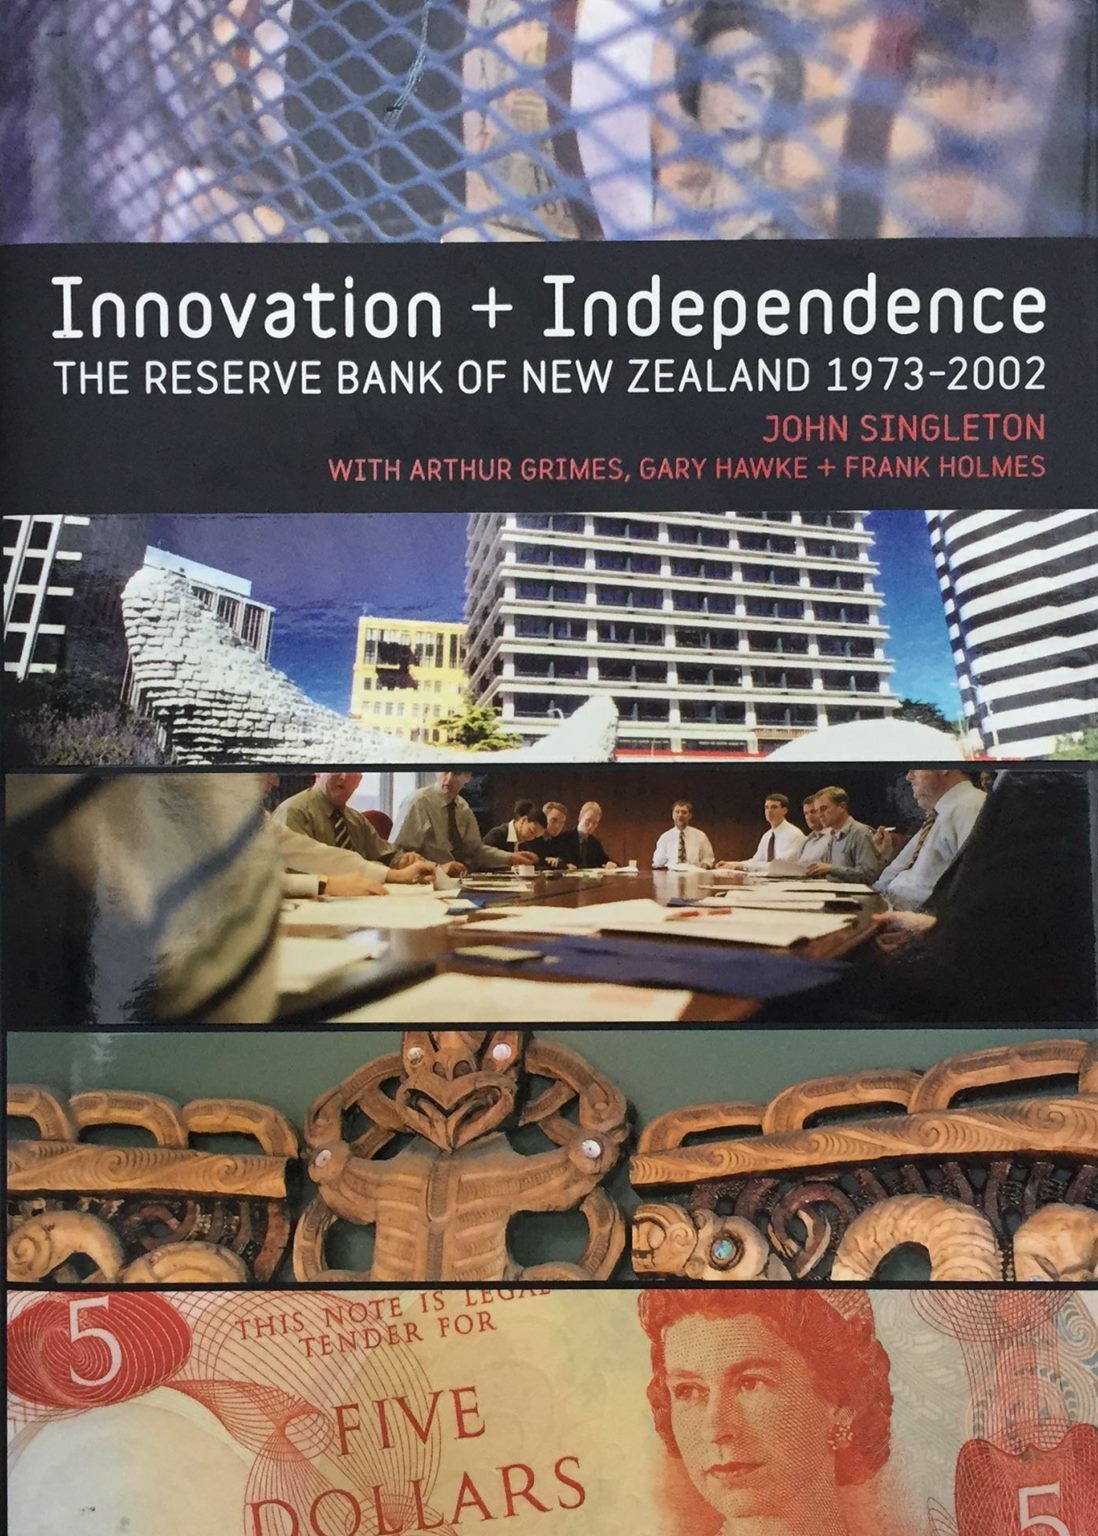 INNOVATION AND INDEPENDENCE: The Reserve Bank of New Zealand 1973 - 2002